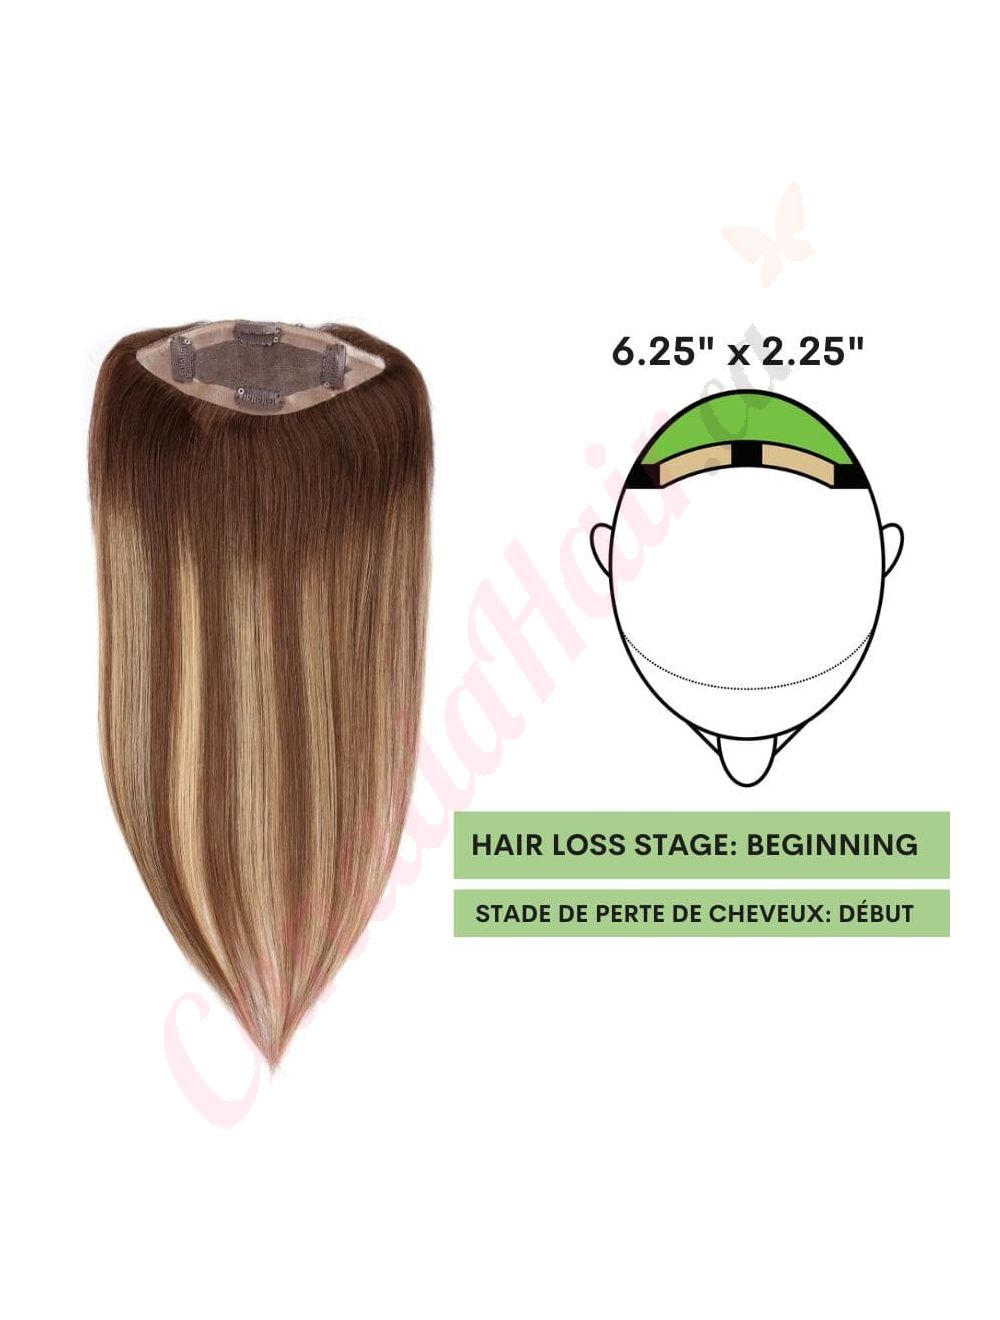 Dark Brown & Blonde Balayage Hair Topper 14 inch For Thinning Hair Full  Crown (Size:  inch x  inch, Weight: 50g) Remy Human Hair